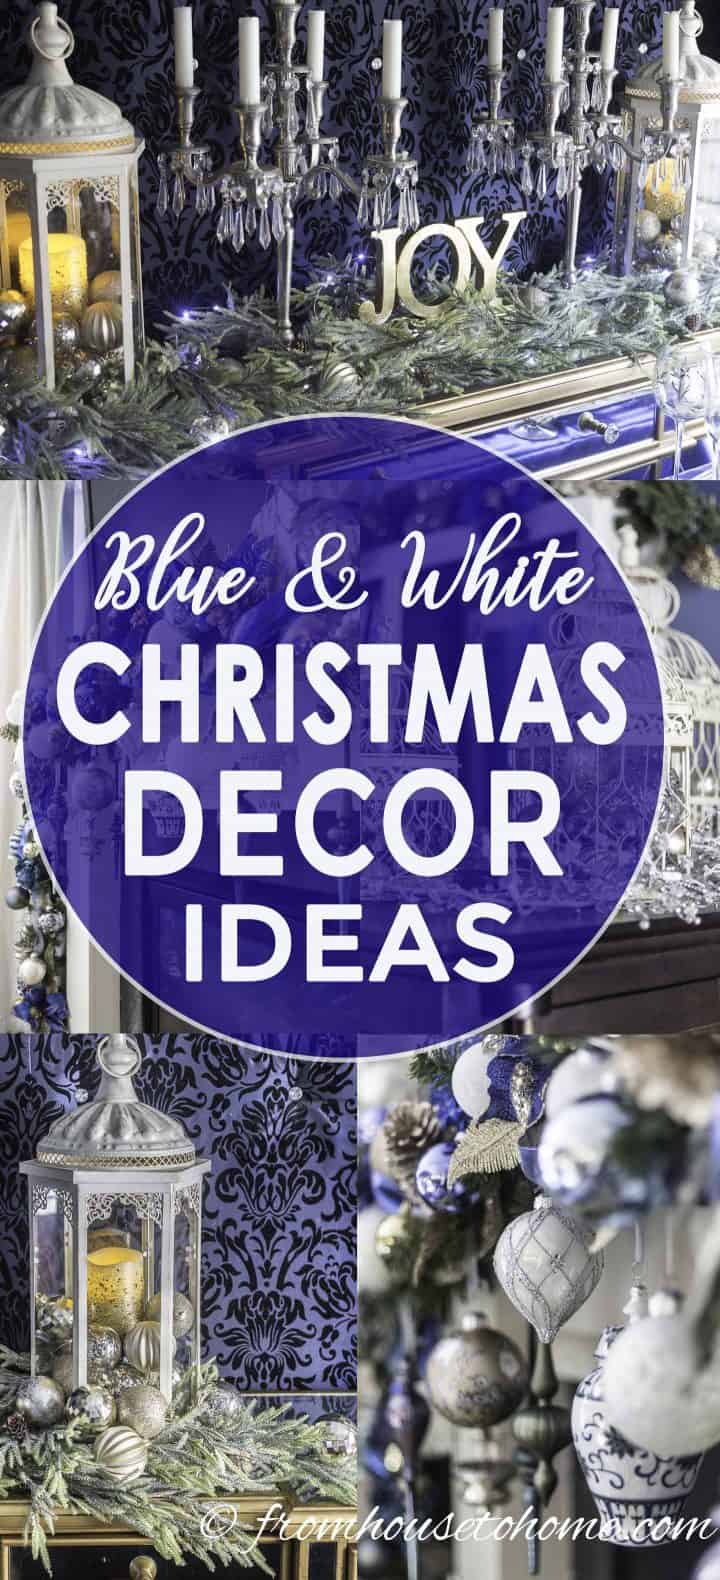 Blue and white Christmas decorating ideas